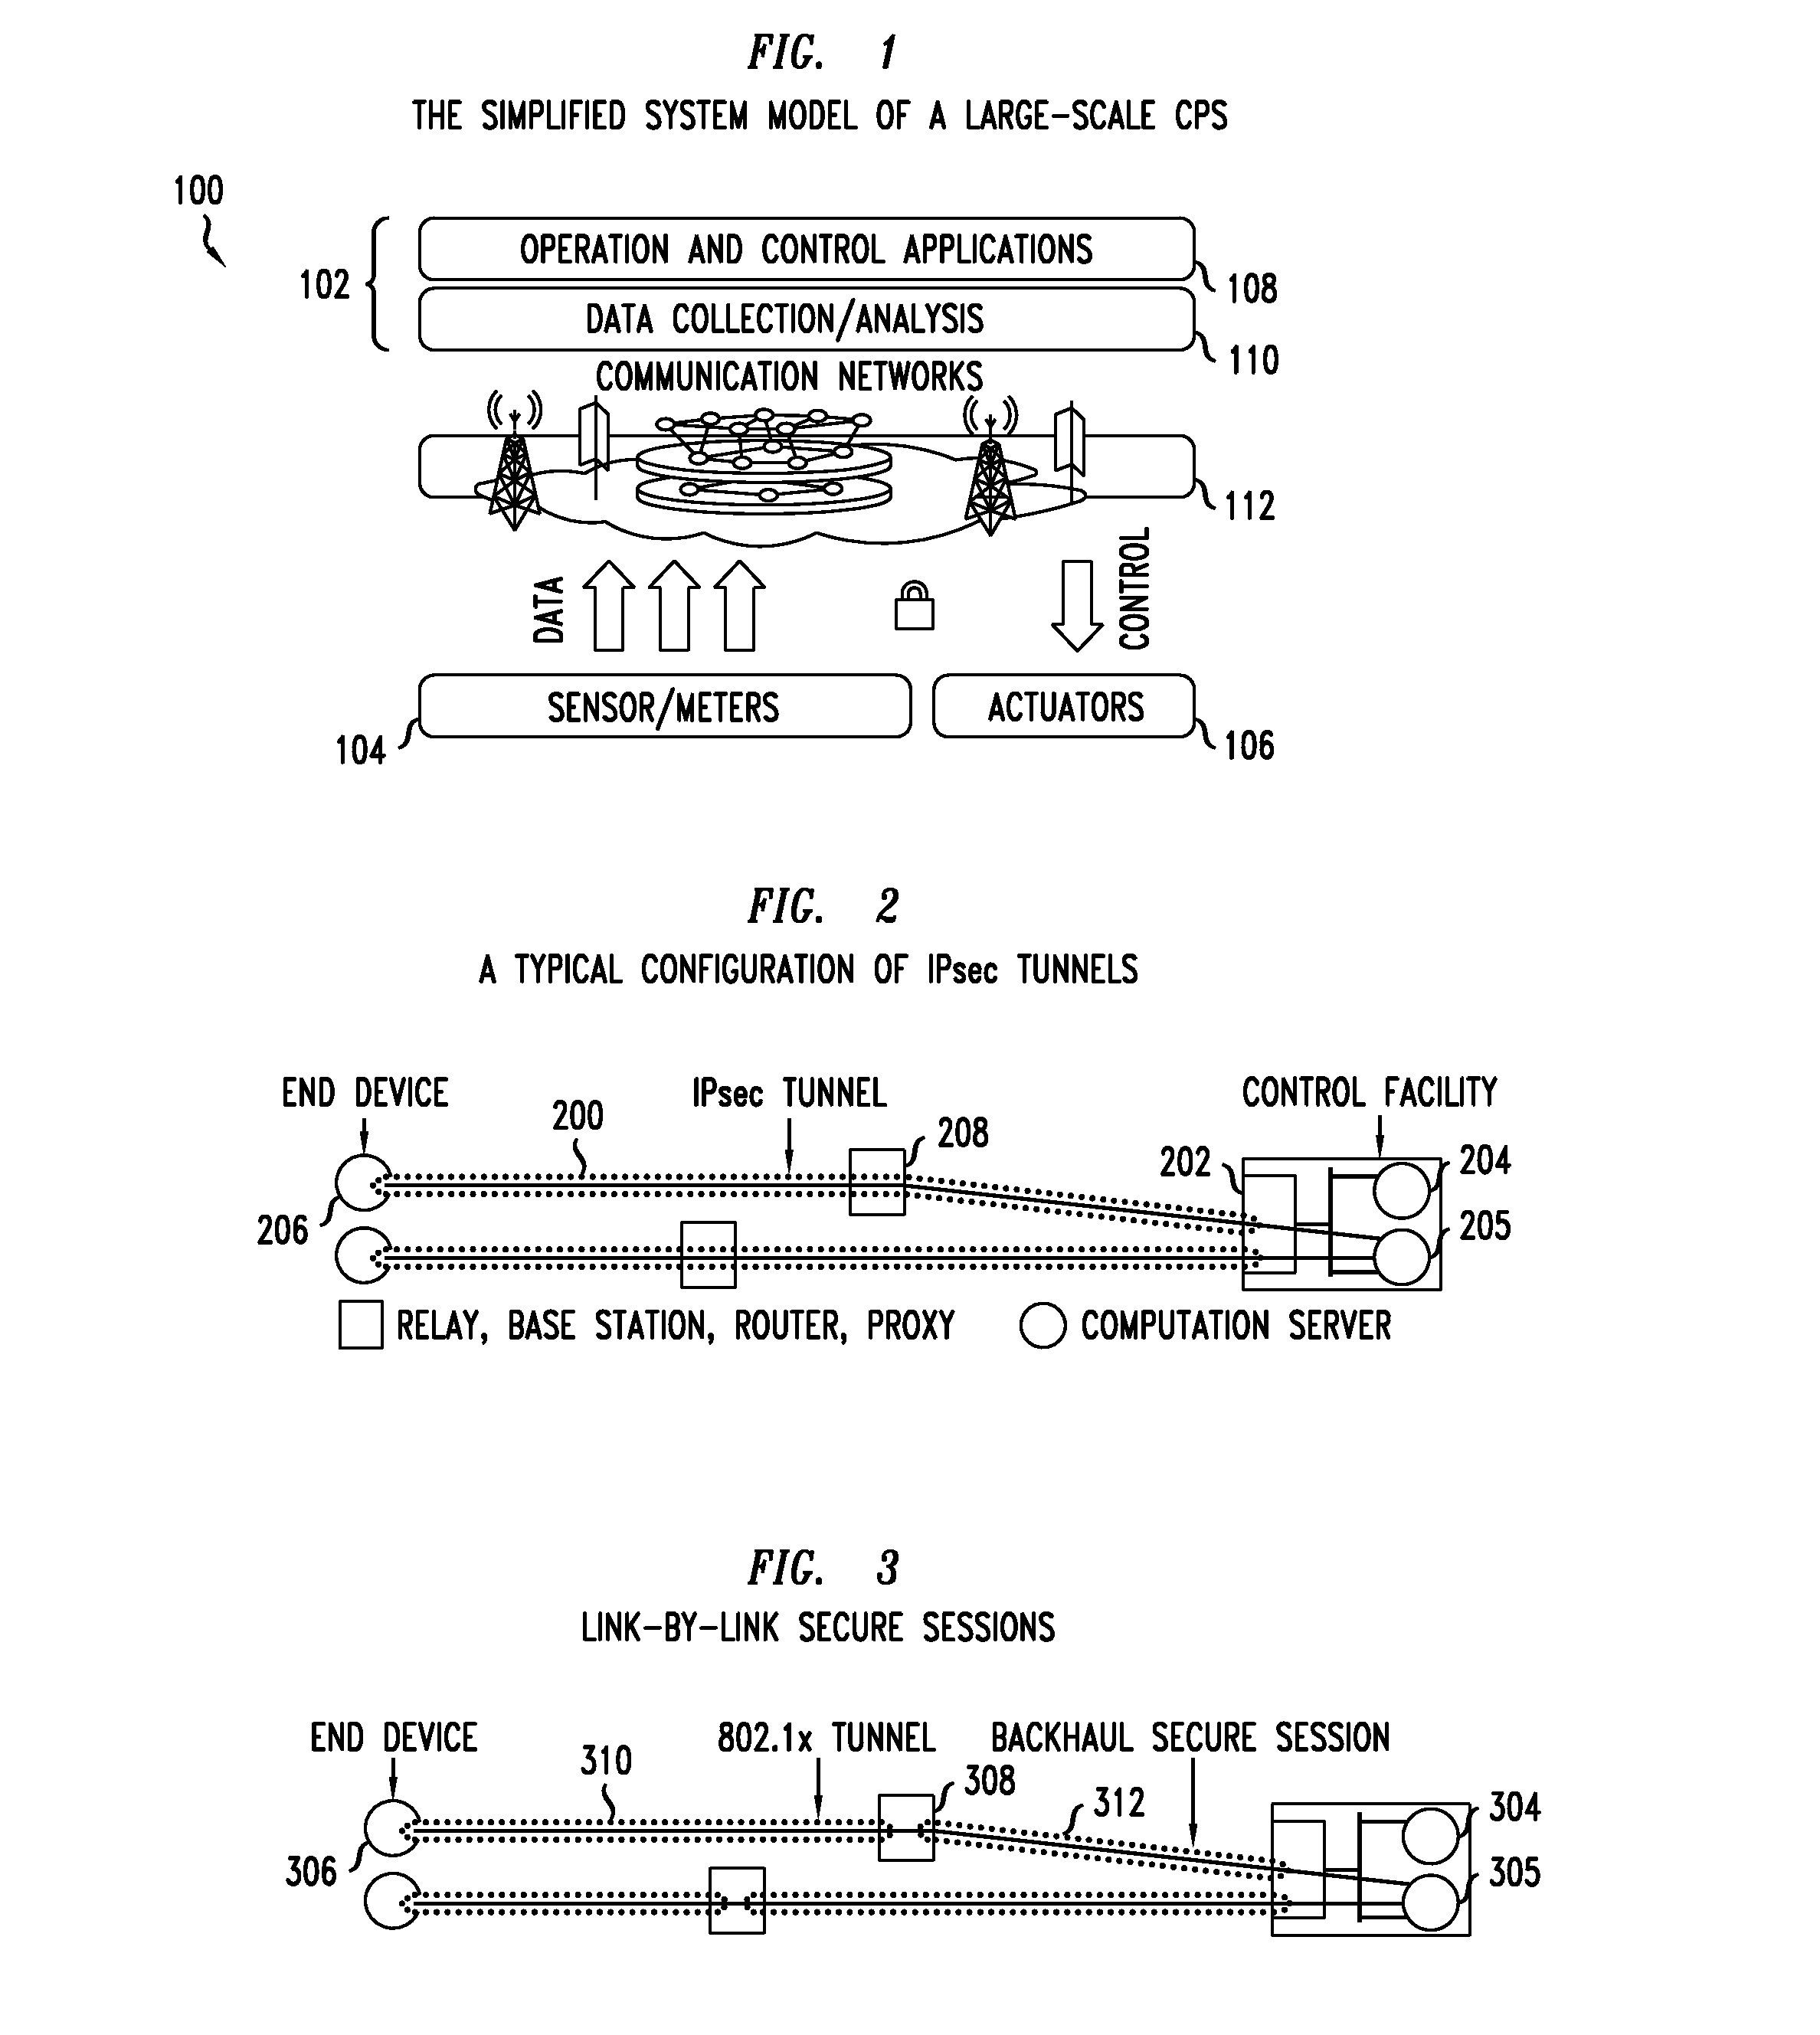 Method and apparatus for resilient end-to-end message protection for large-scale cyber-physical system communications